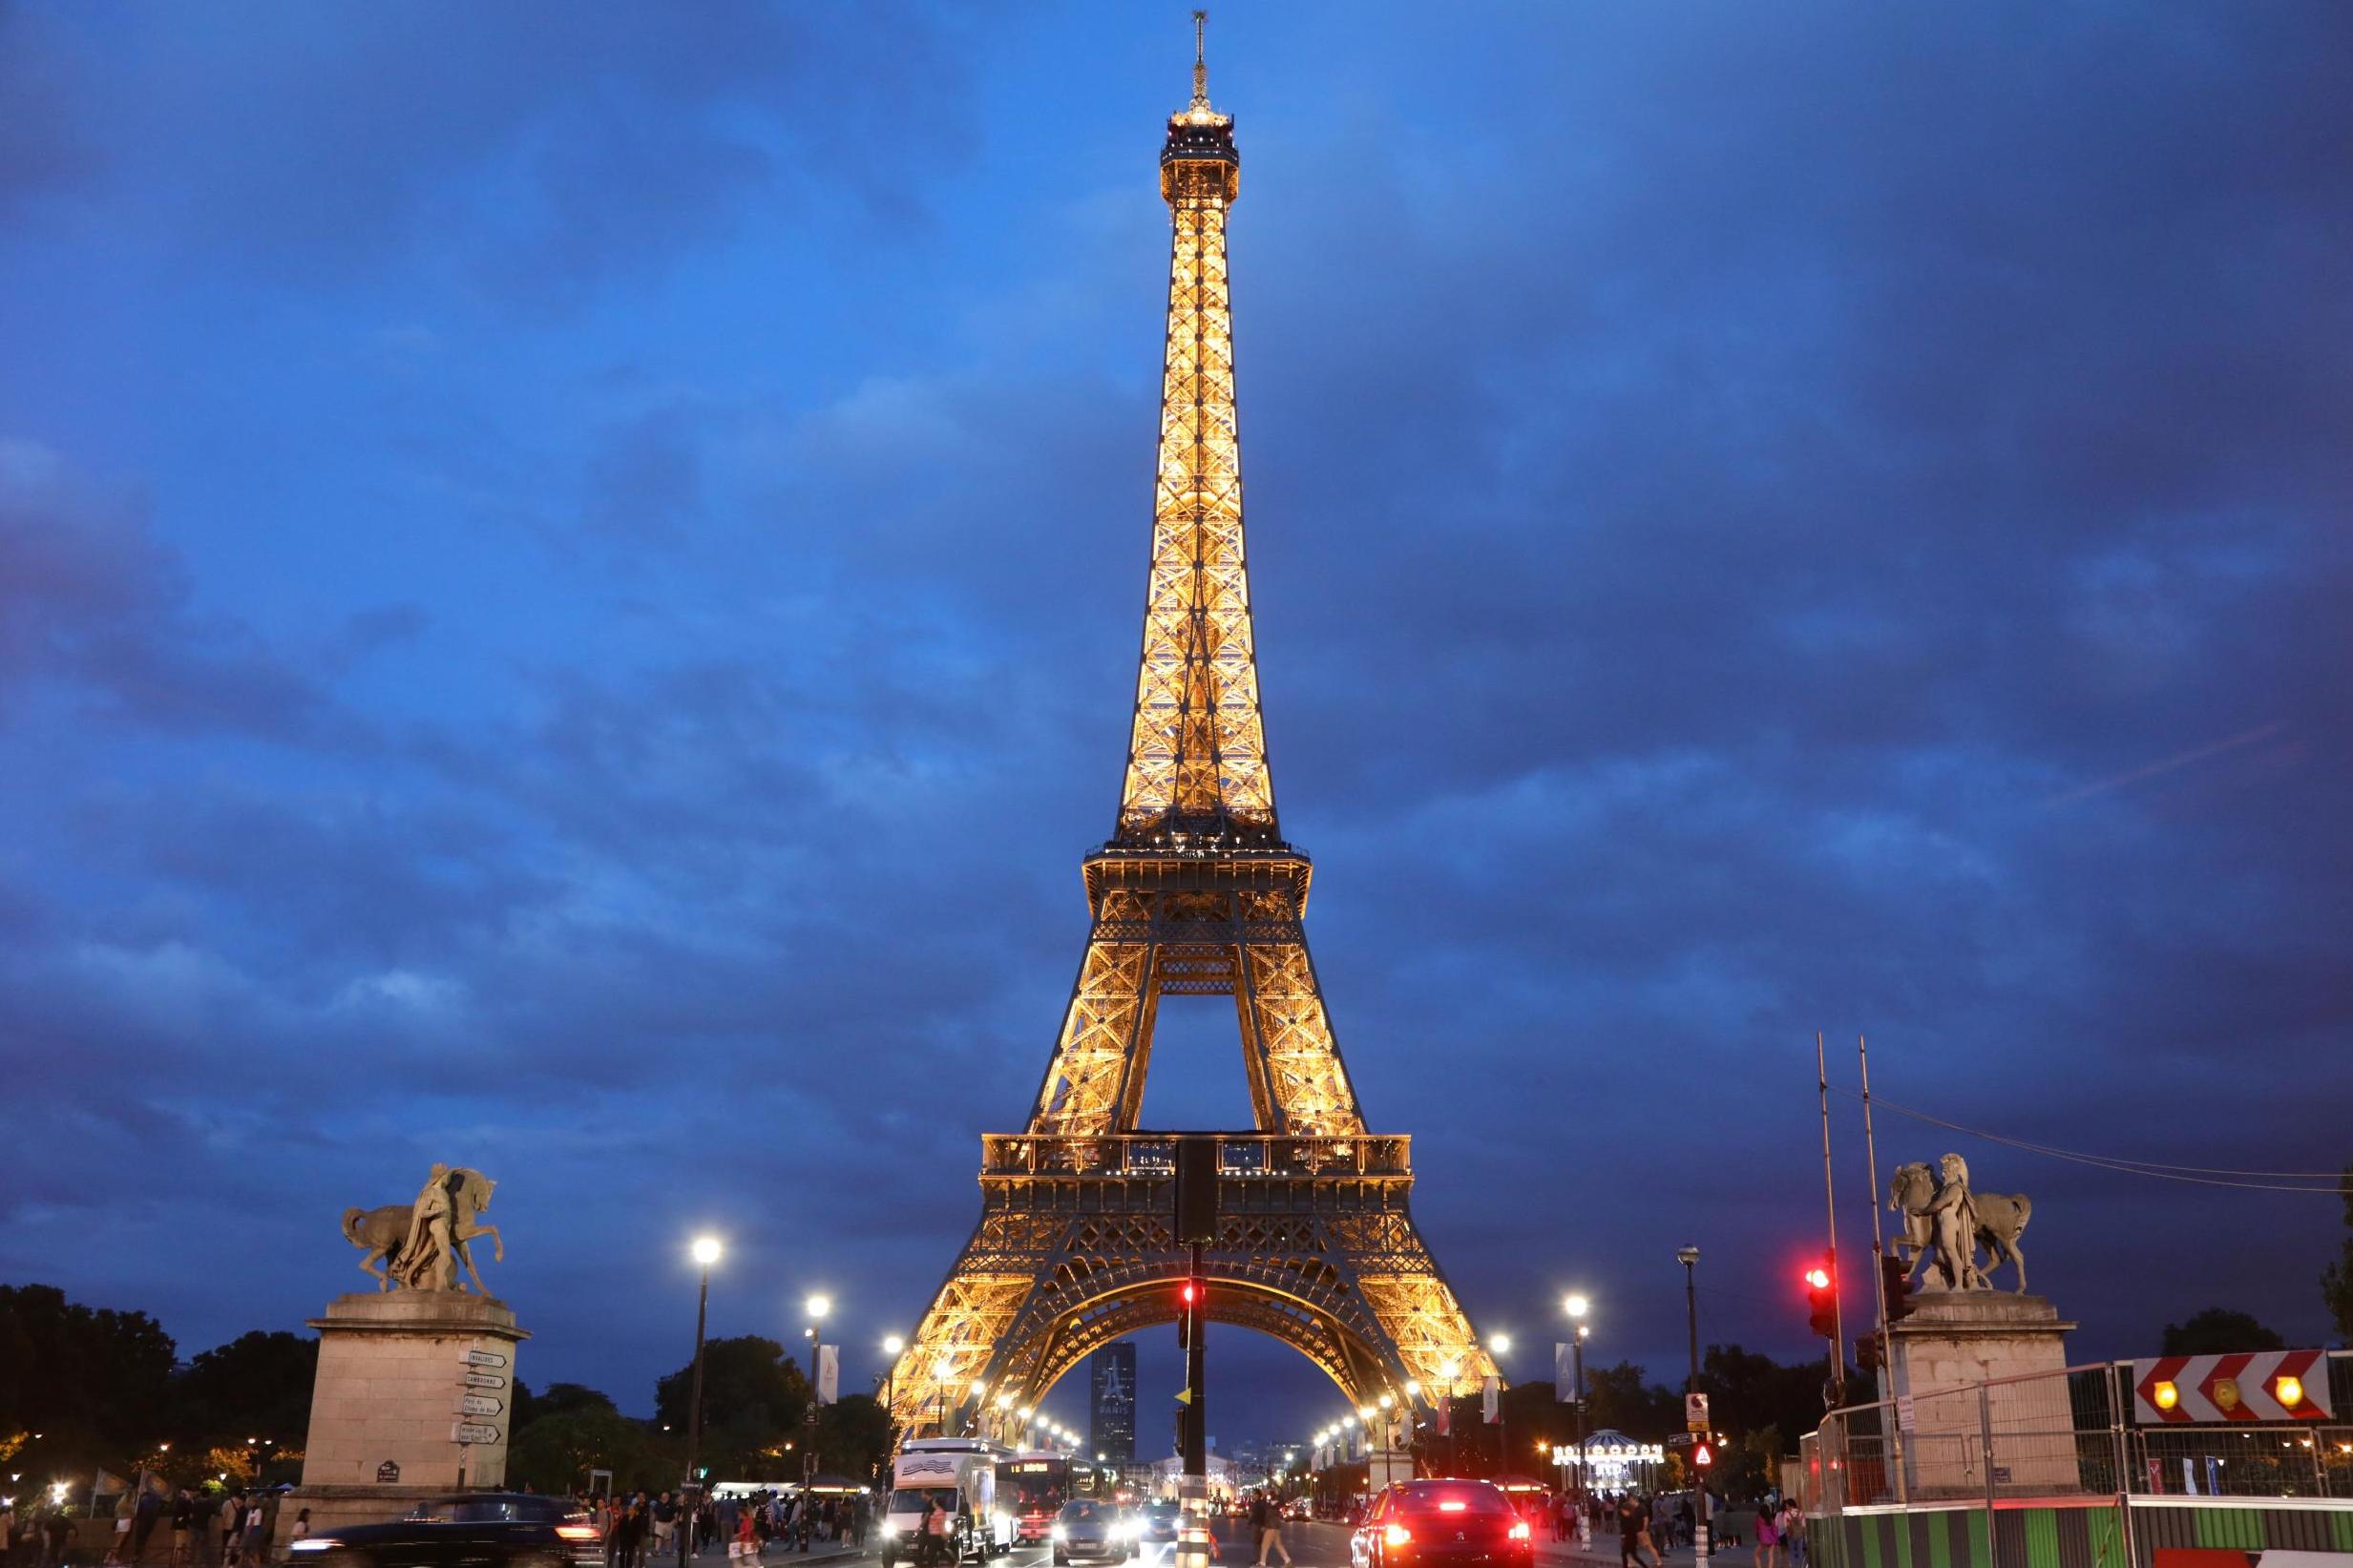 Eiffel Tower on 'lockdown' as Paris tourists report being trapped in ...